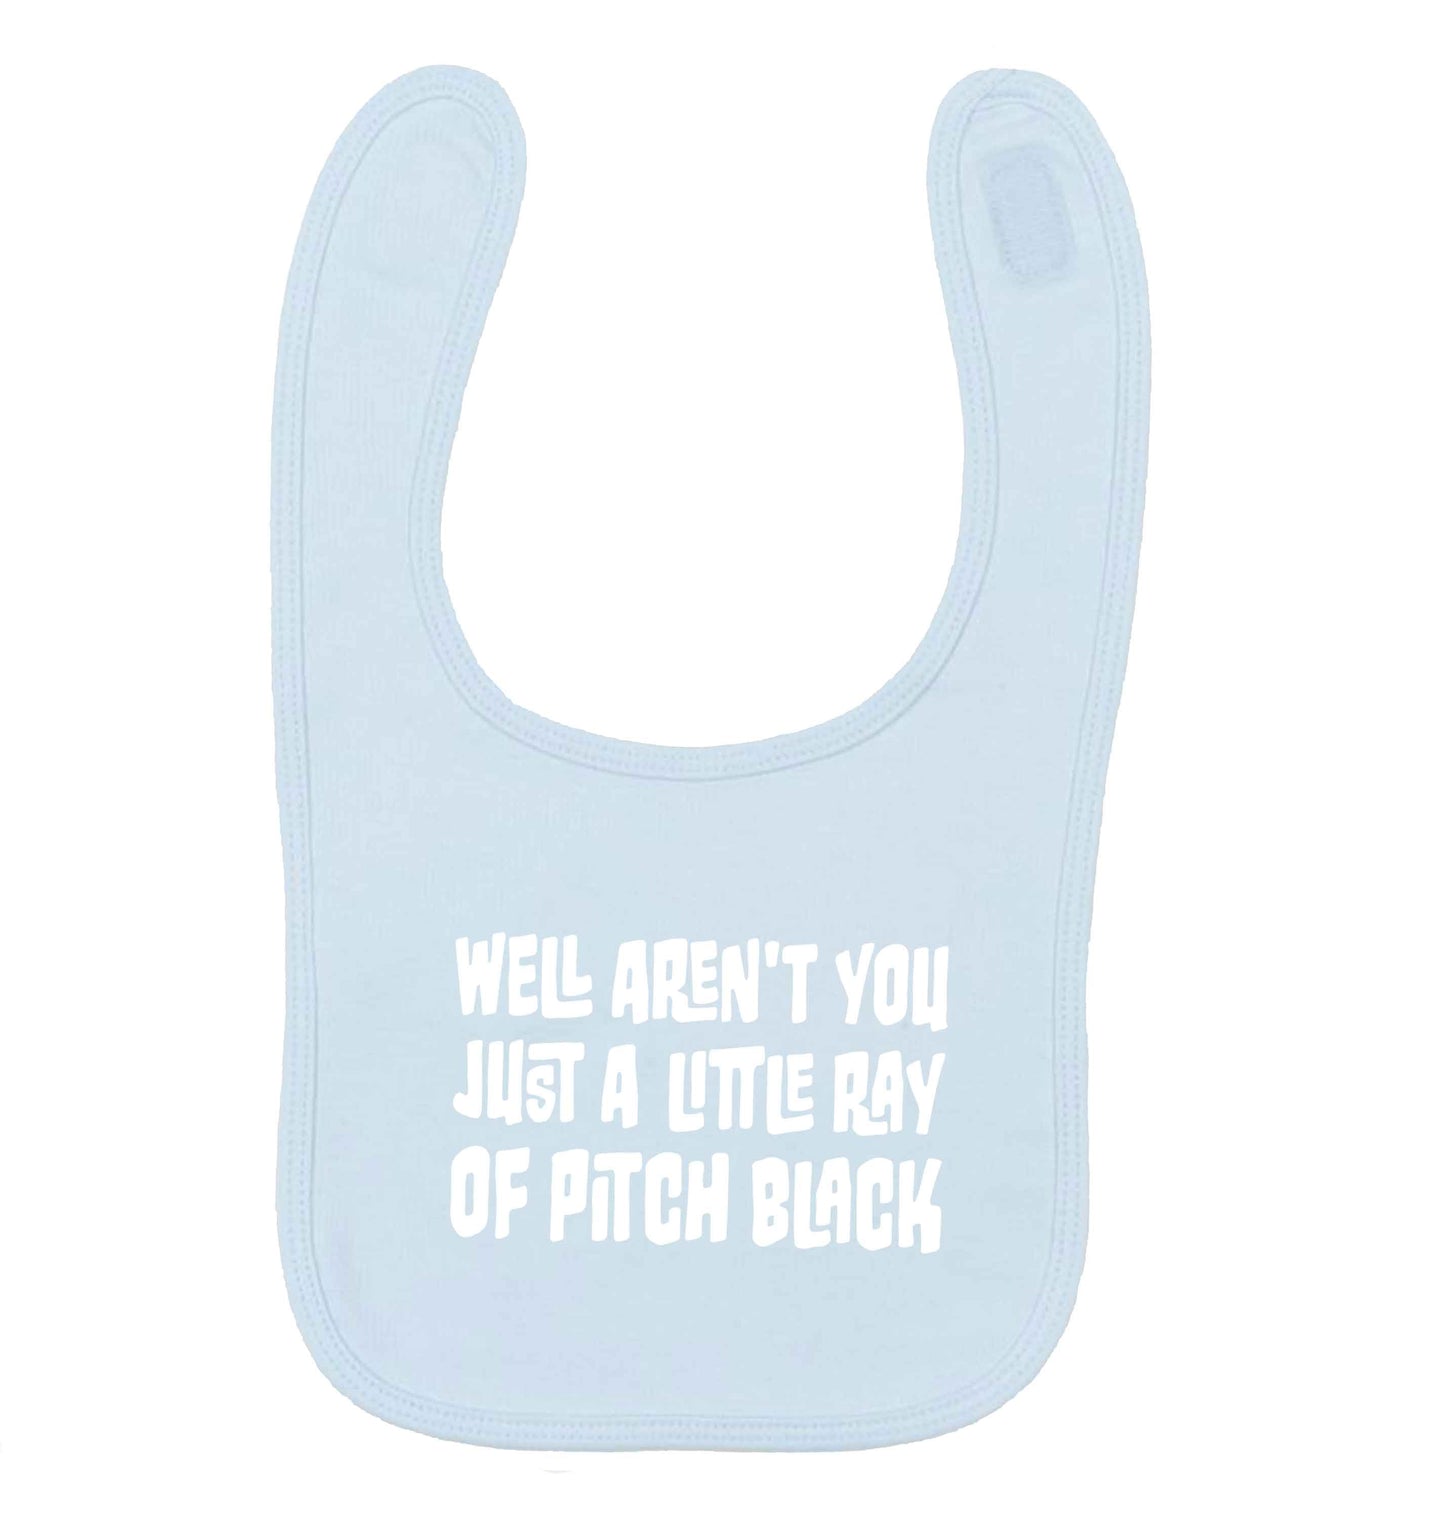 Well aren't you just a little ray of pitch black Kit pale blue baby bib